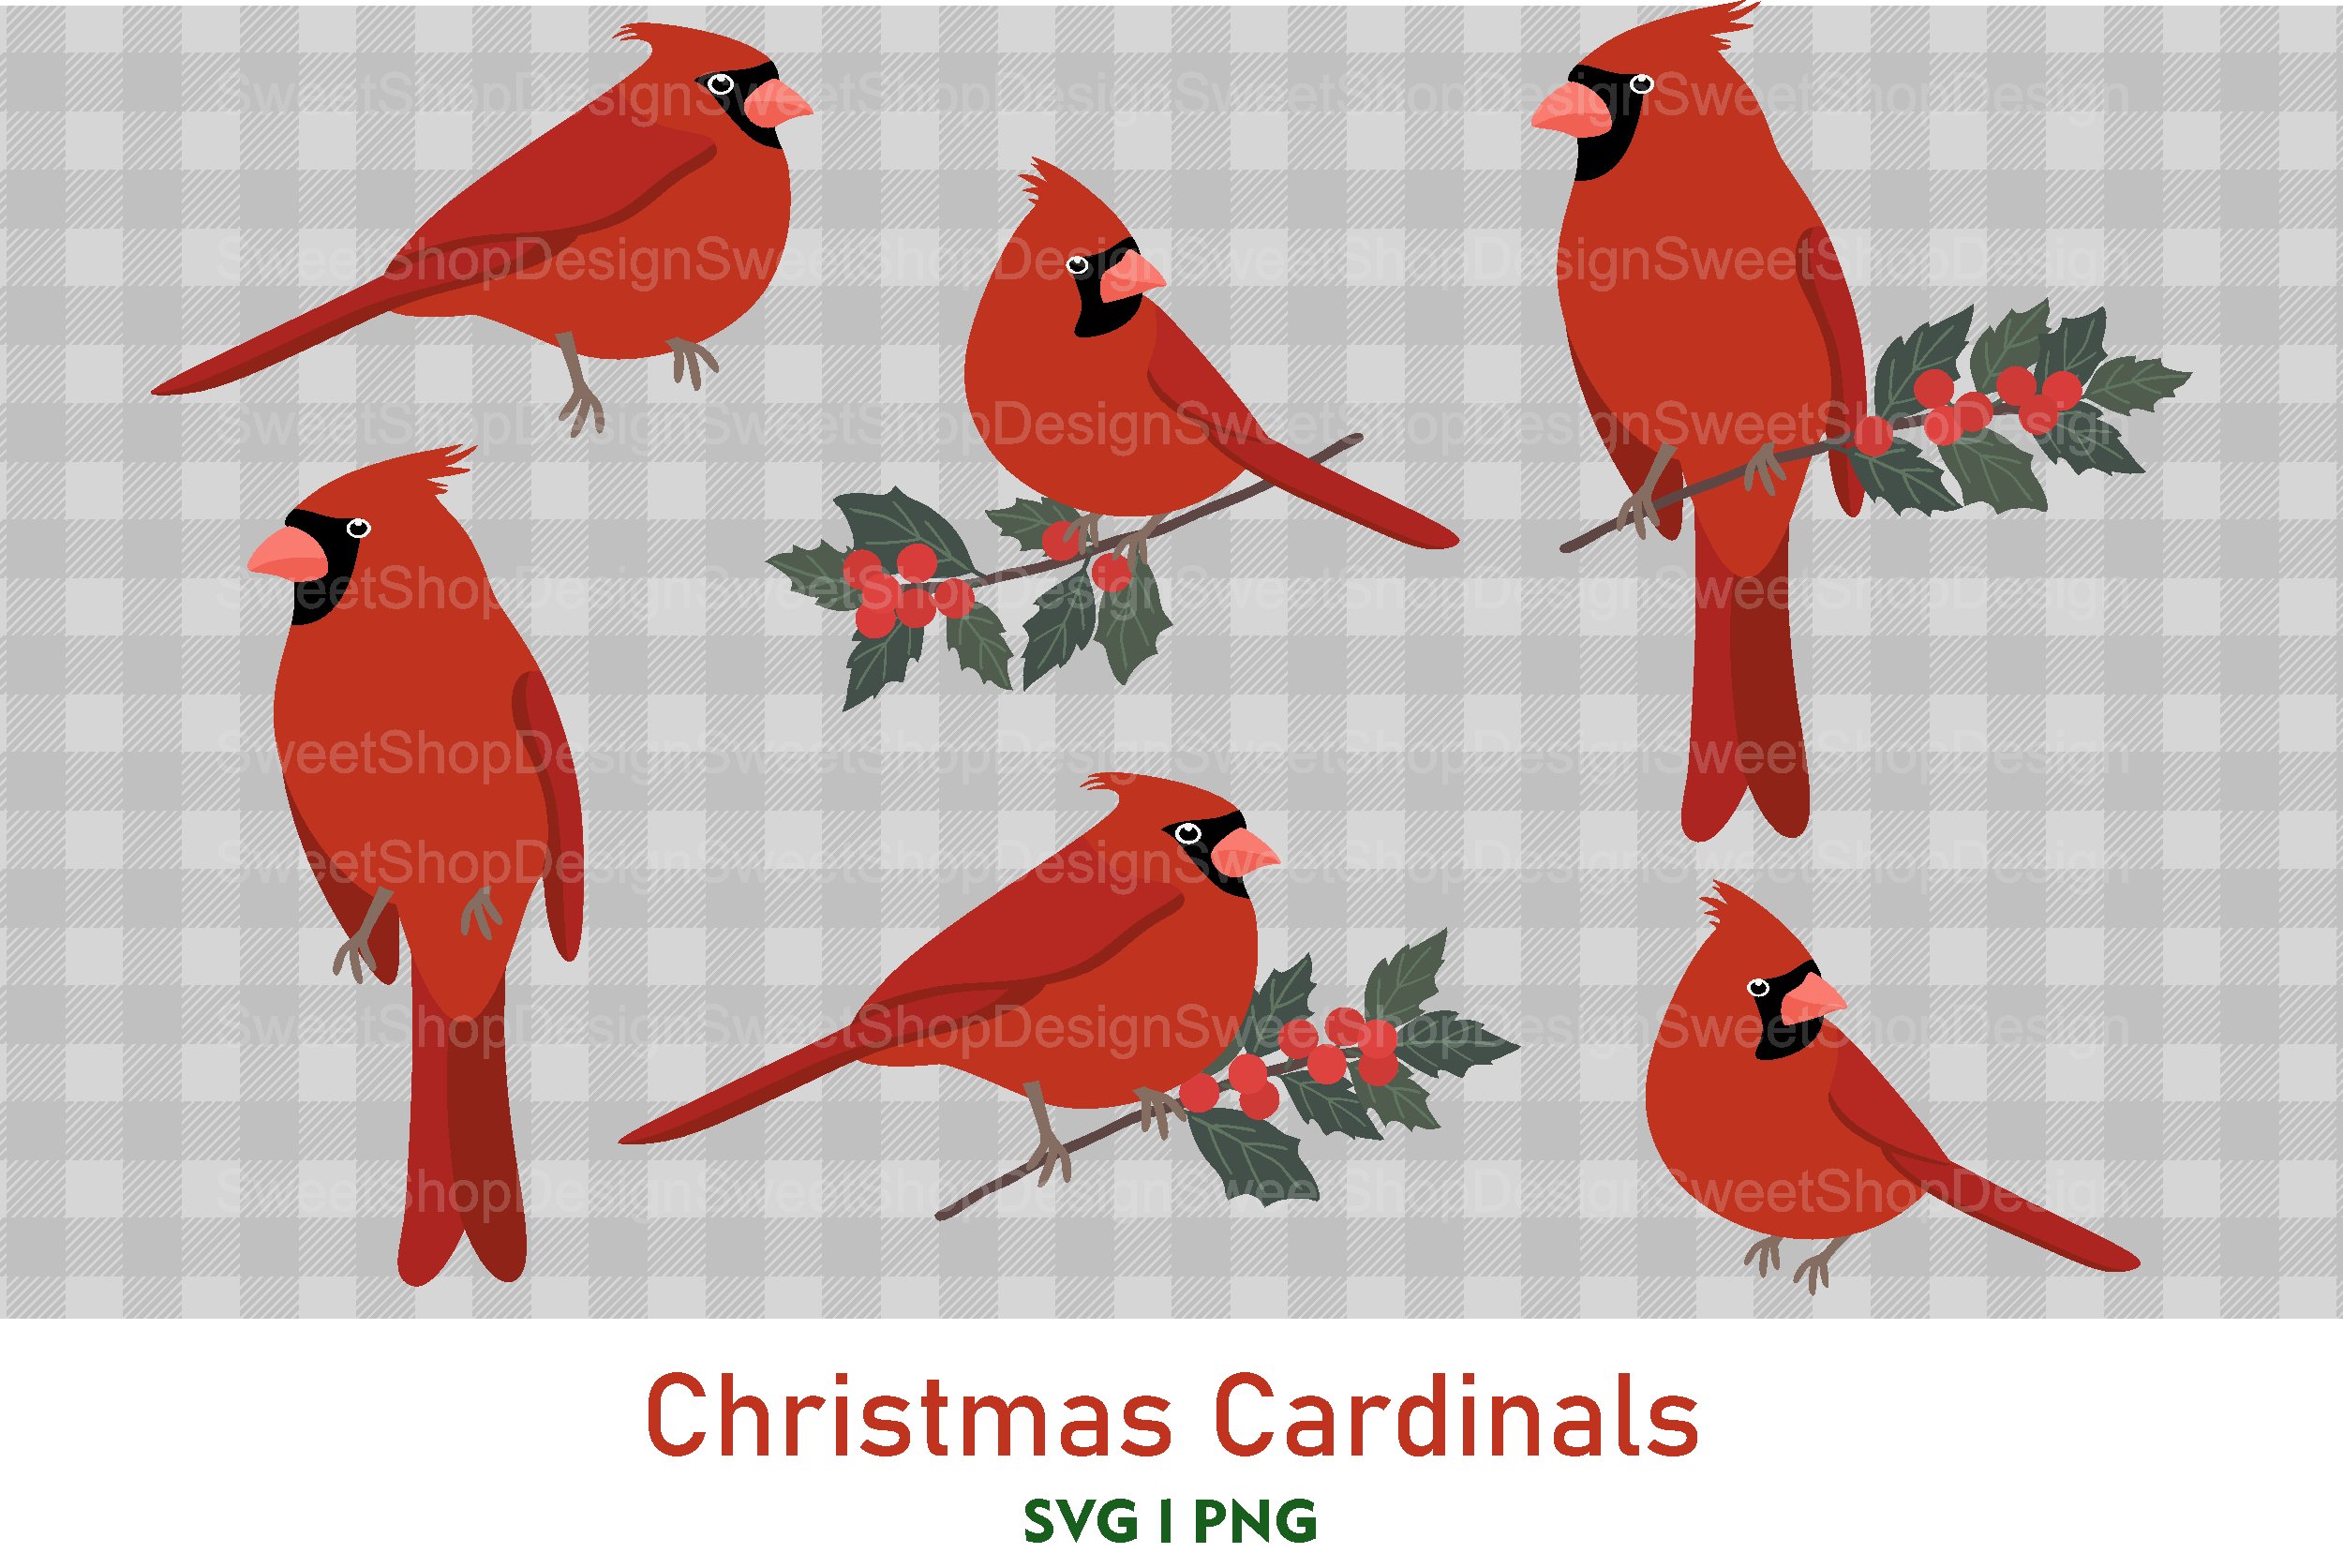 Set of four cardinals sitting on a branch with holly.